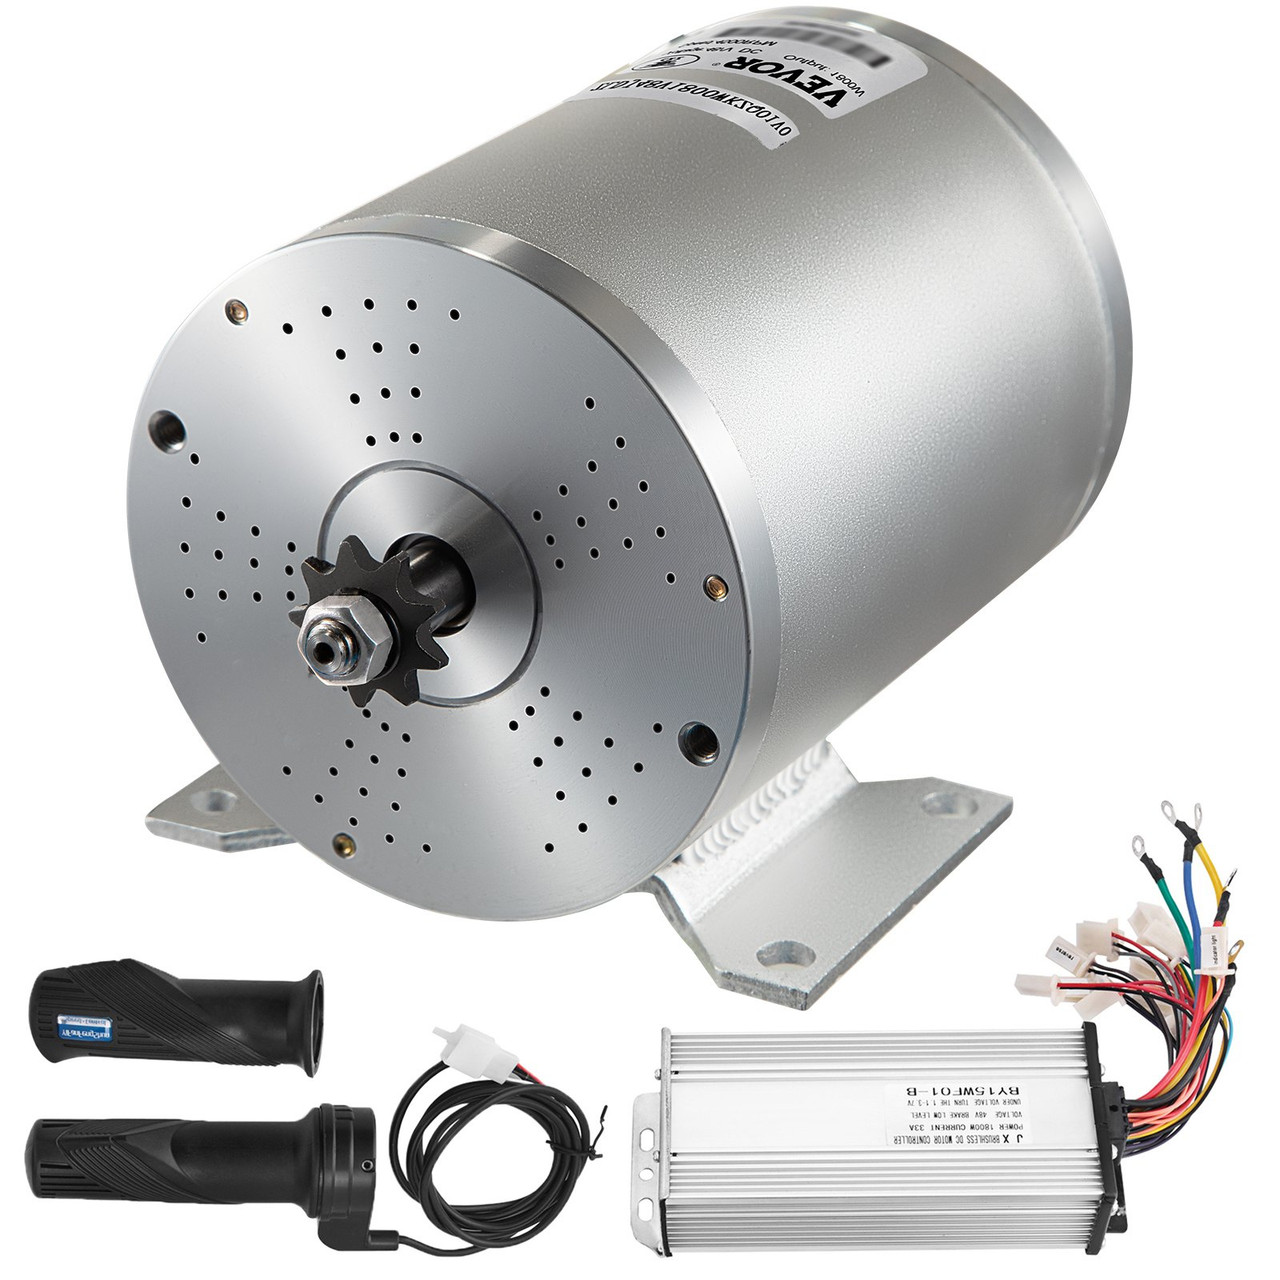 1800W Electric DC Motor Kit - 48V 4500rpm Brushless Motor with 33A High Speed Controller and Throttle Grip Kit for Go Karts E-Bike Electric Throttle